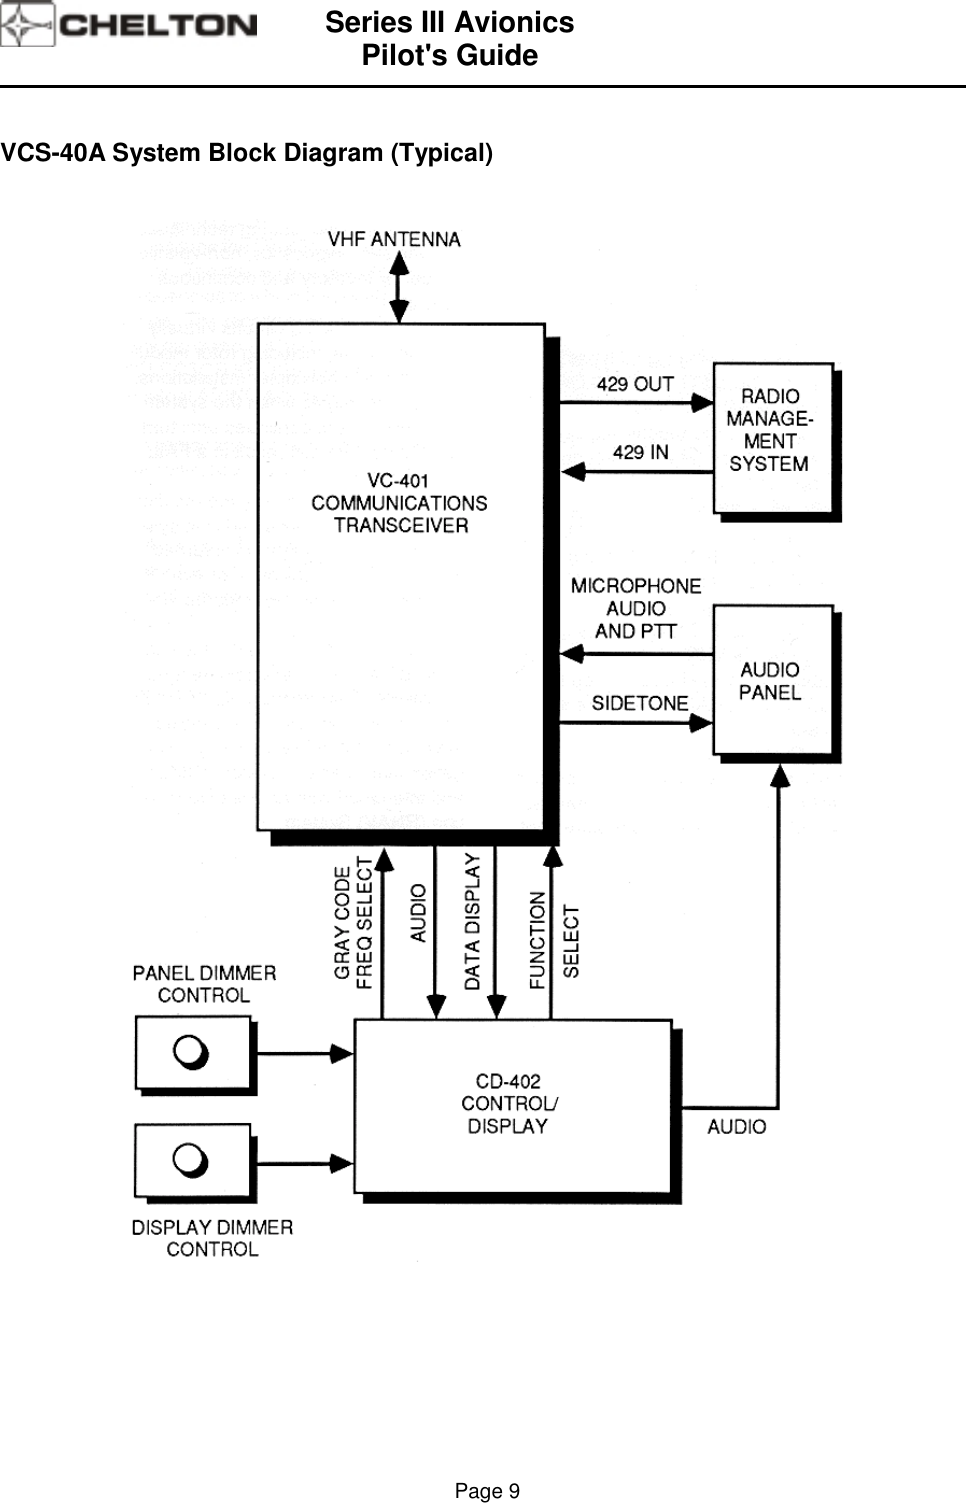 Series III AvionicsPilot&apos;s Guide                                                                                                                                          Page 9VCS-40A System Block Diagram (Typical)